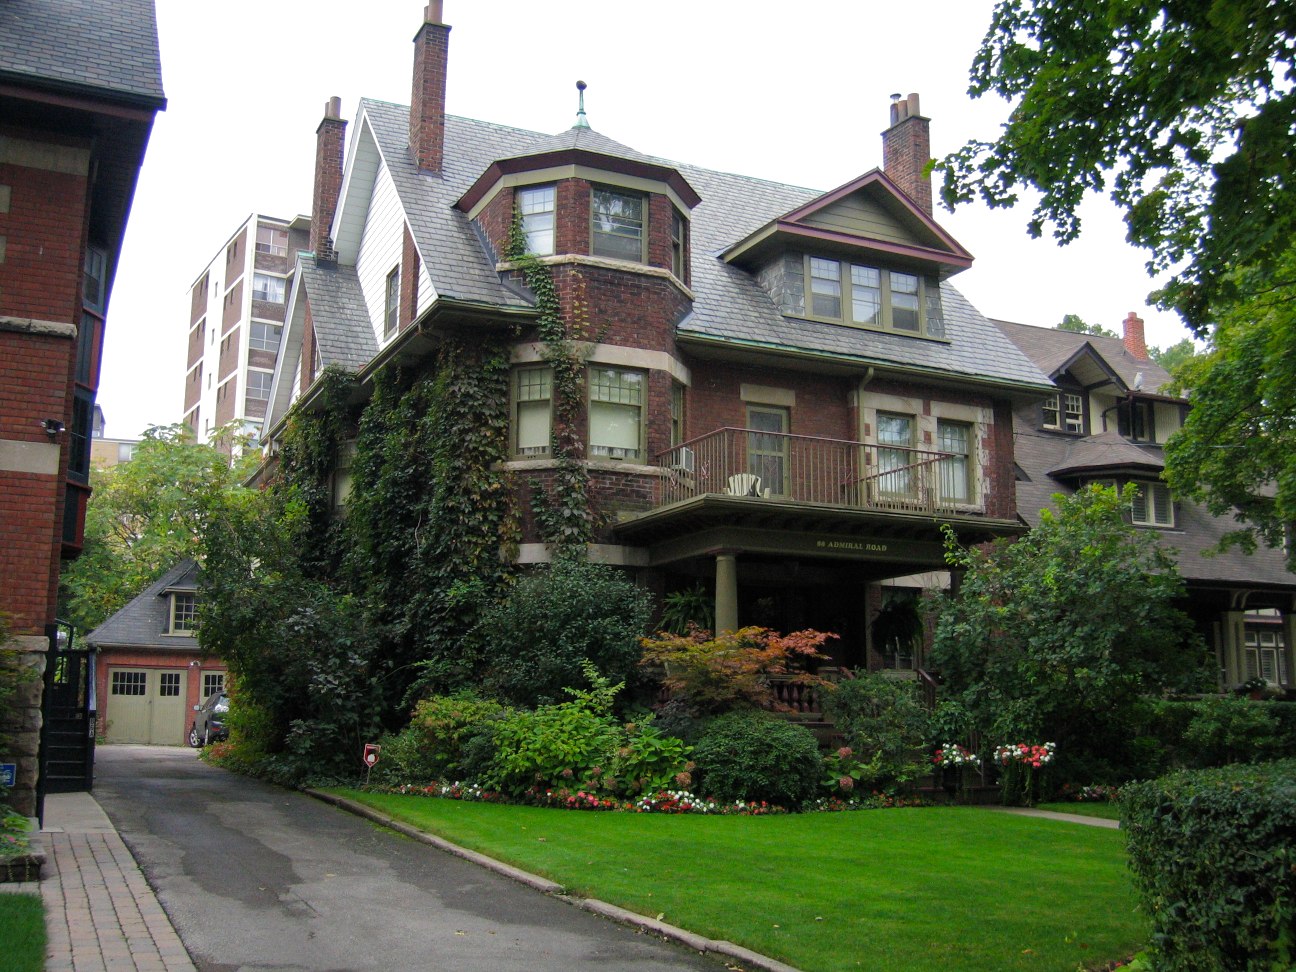 Brown Victorian mansion with green lawn, shrubs and ivy on Bathurst and Bloor West in The Annex neighbourhood.